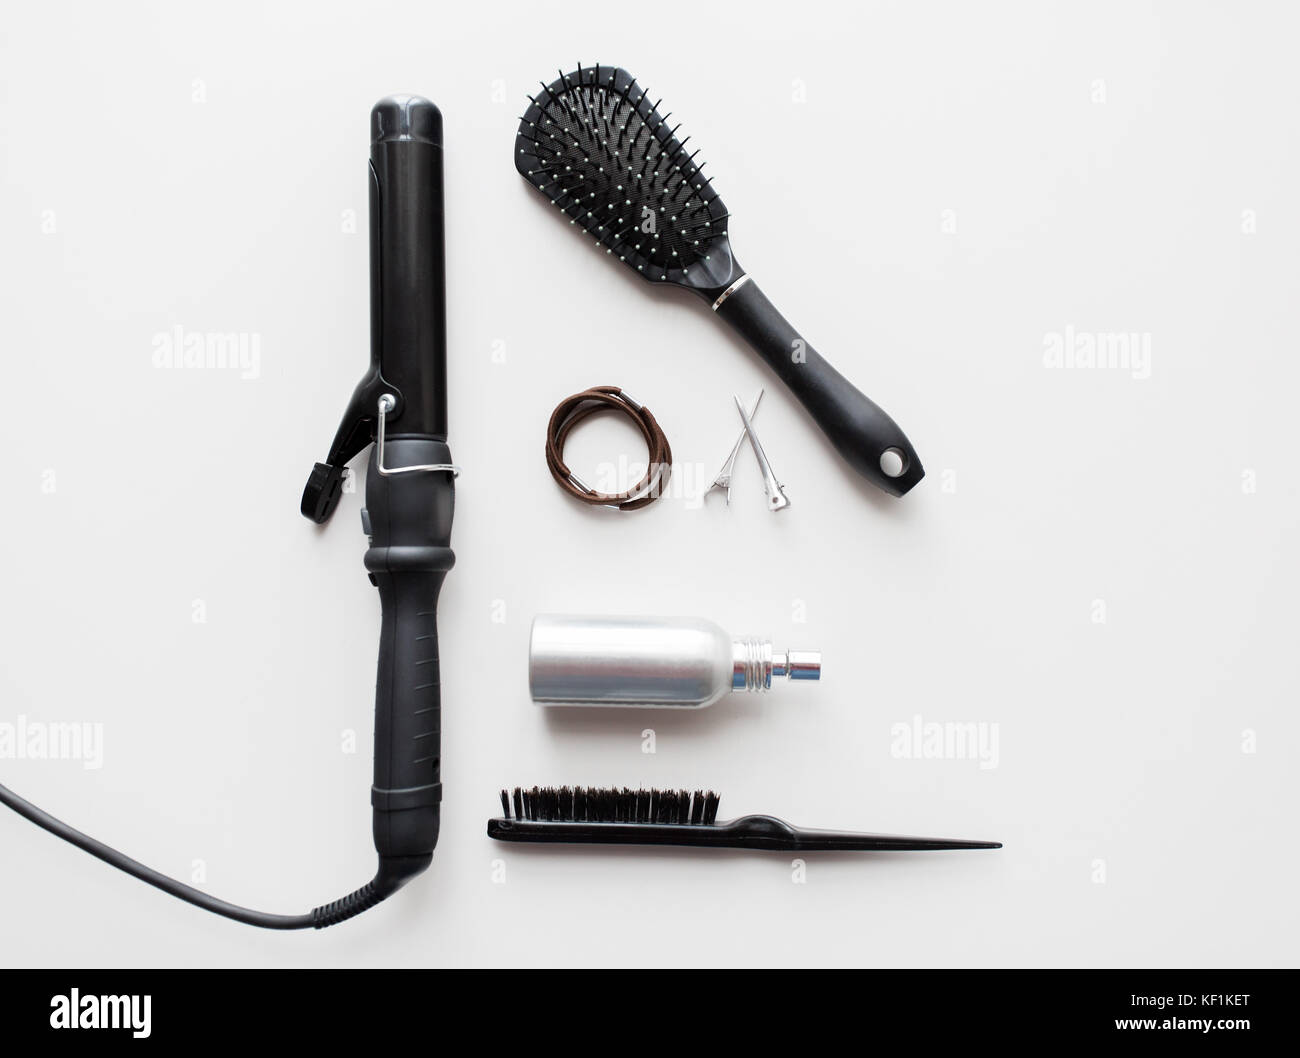 iron, brushes, styling spay, hair ties and pins Stock Photo